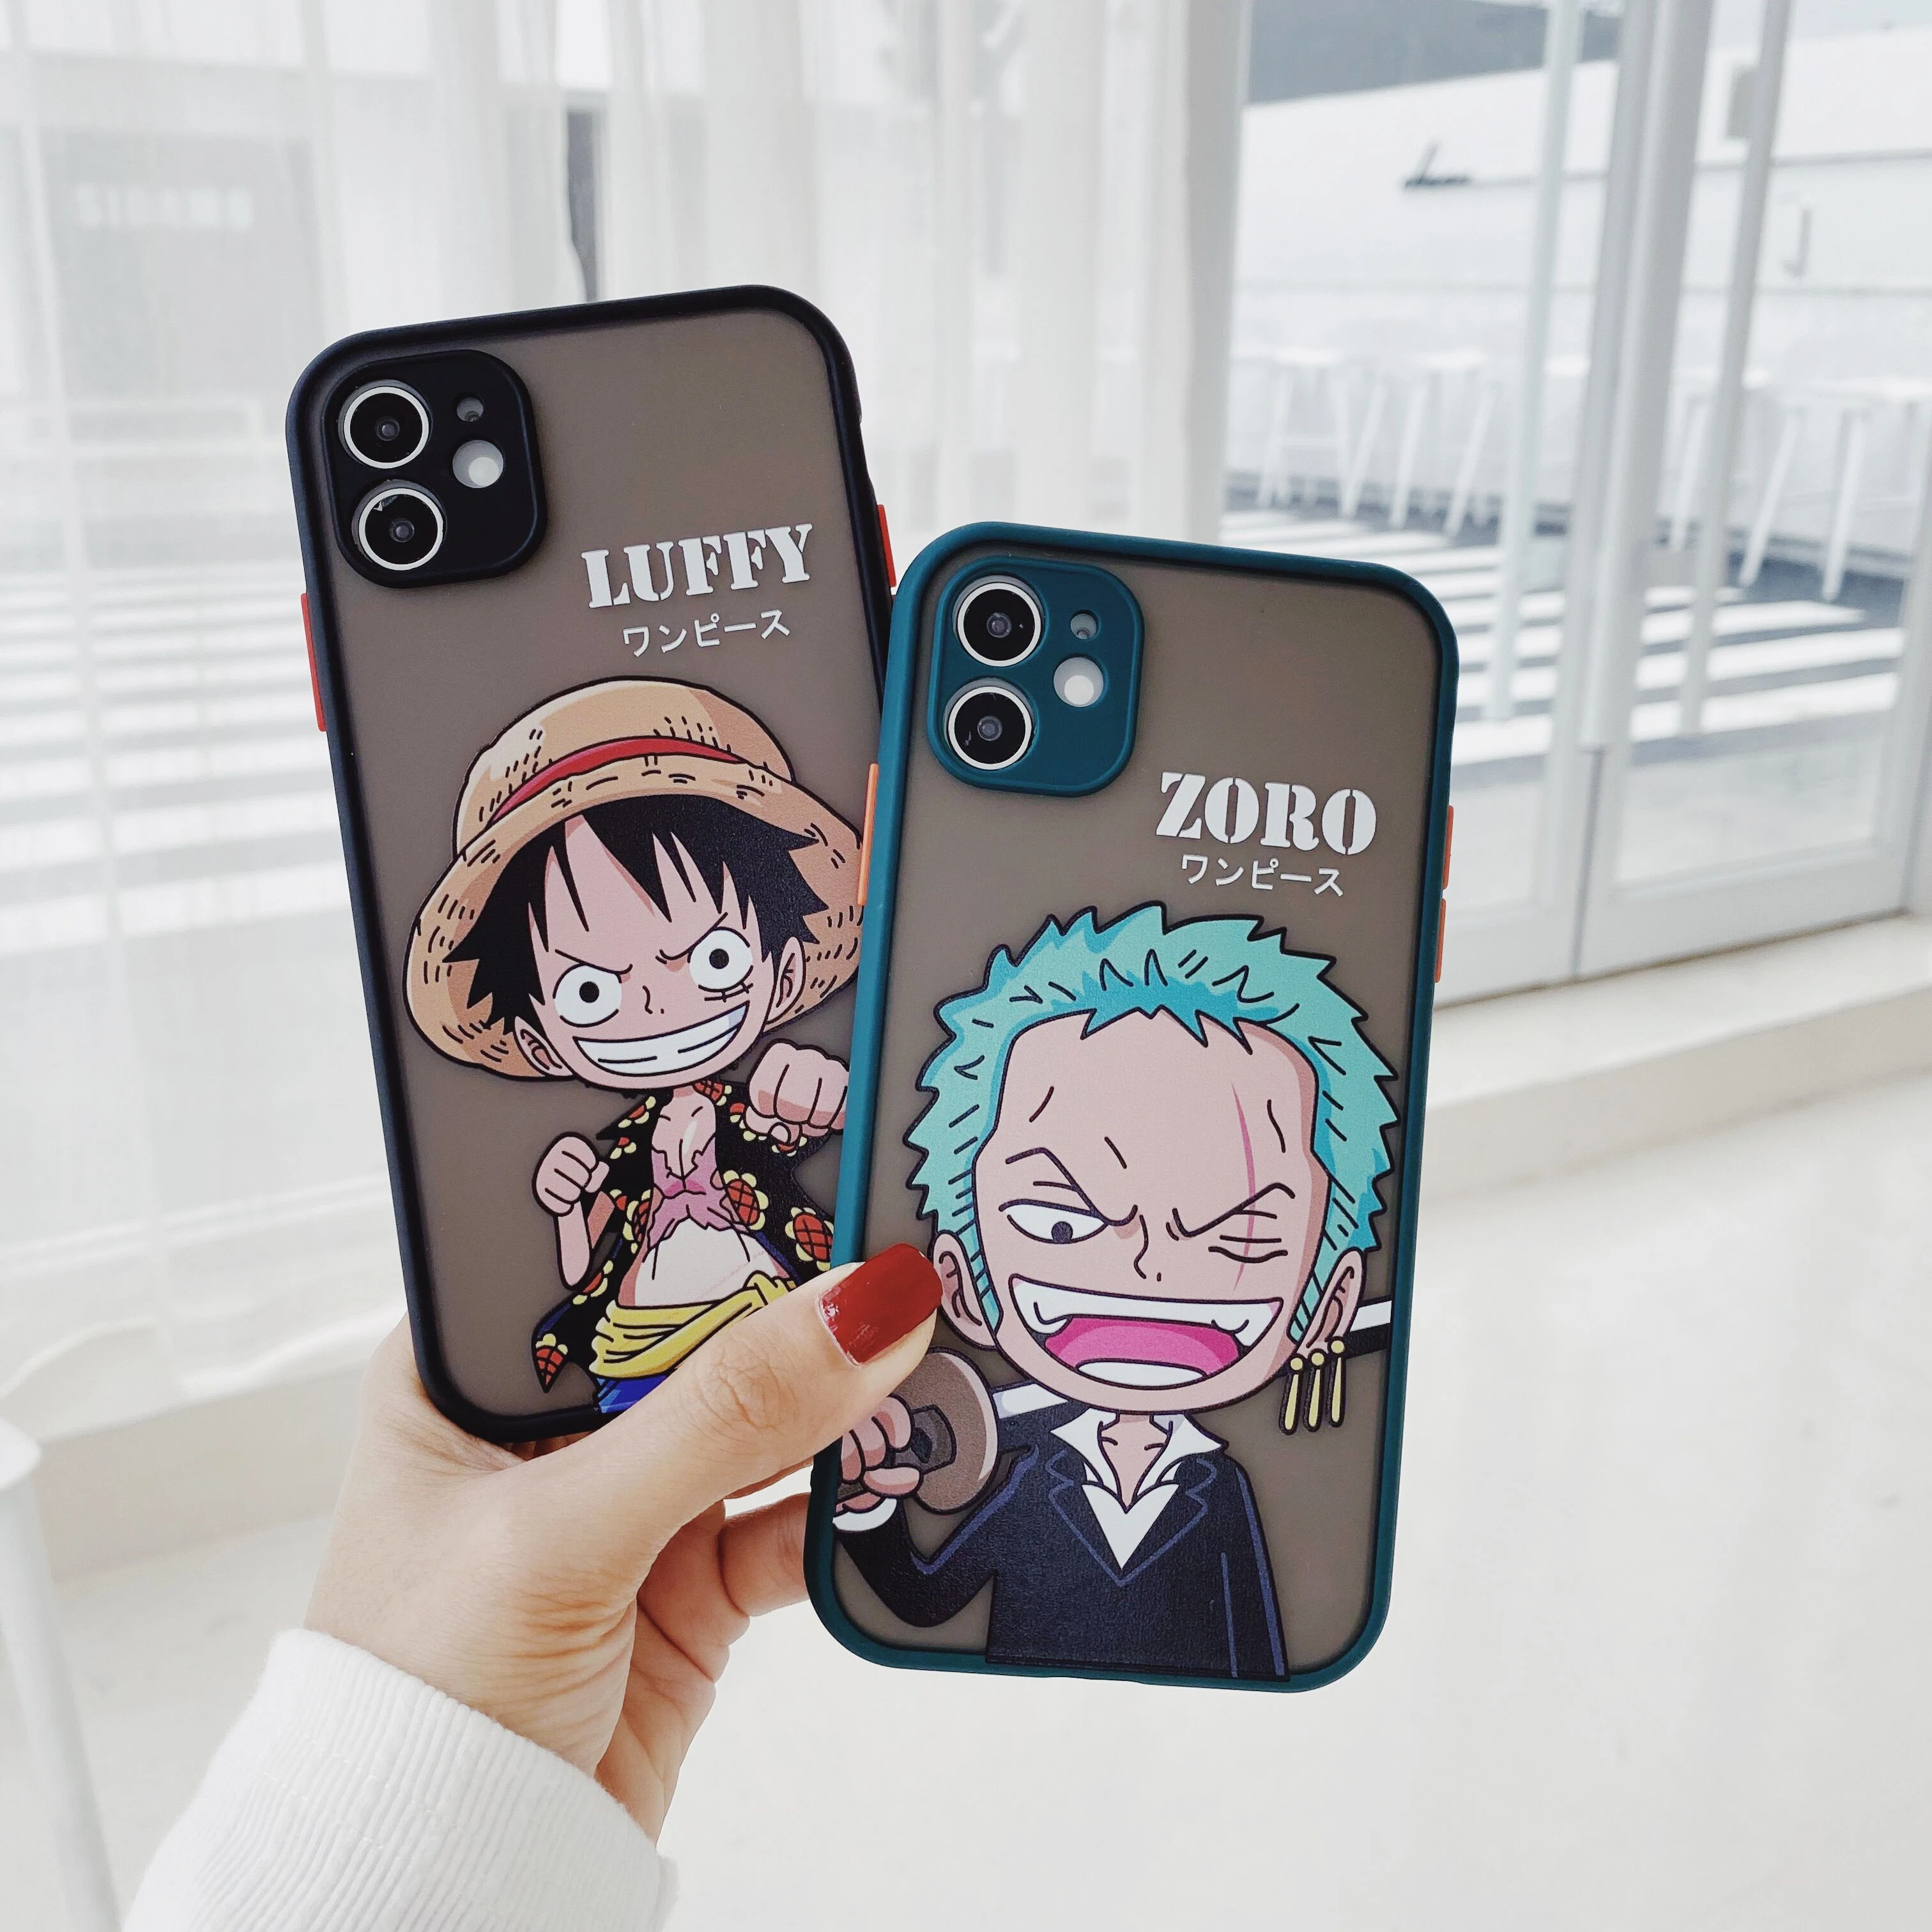 Japan Cute One Piece 3D Luffy Zoro Anime Case For Iphone 12 11 Pro X XS MAX 7 8 Plus SE2020 Lovely Skin Feel Pc Back Cover Coque